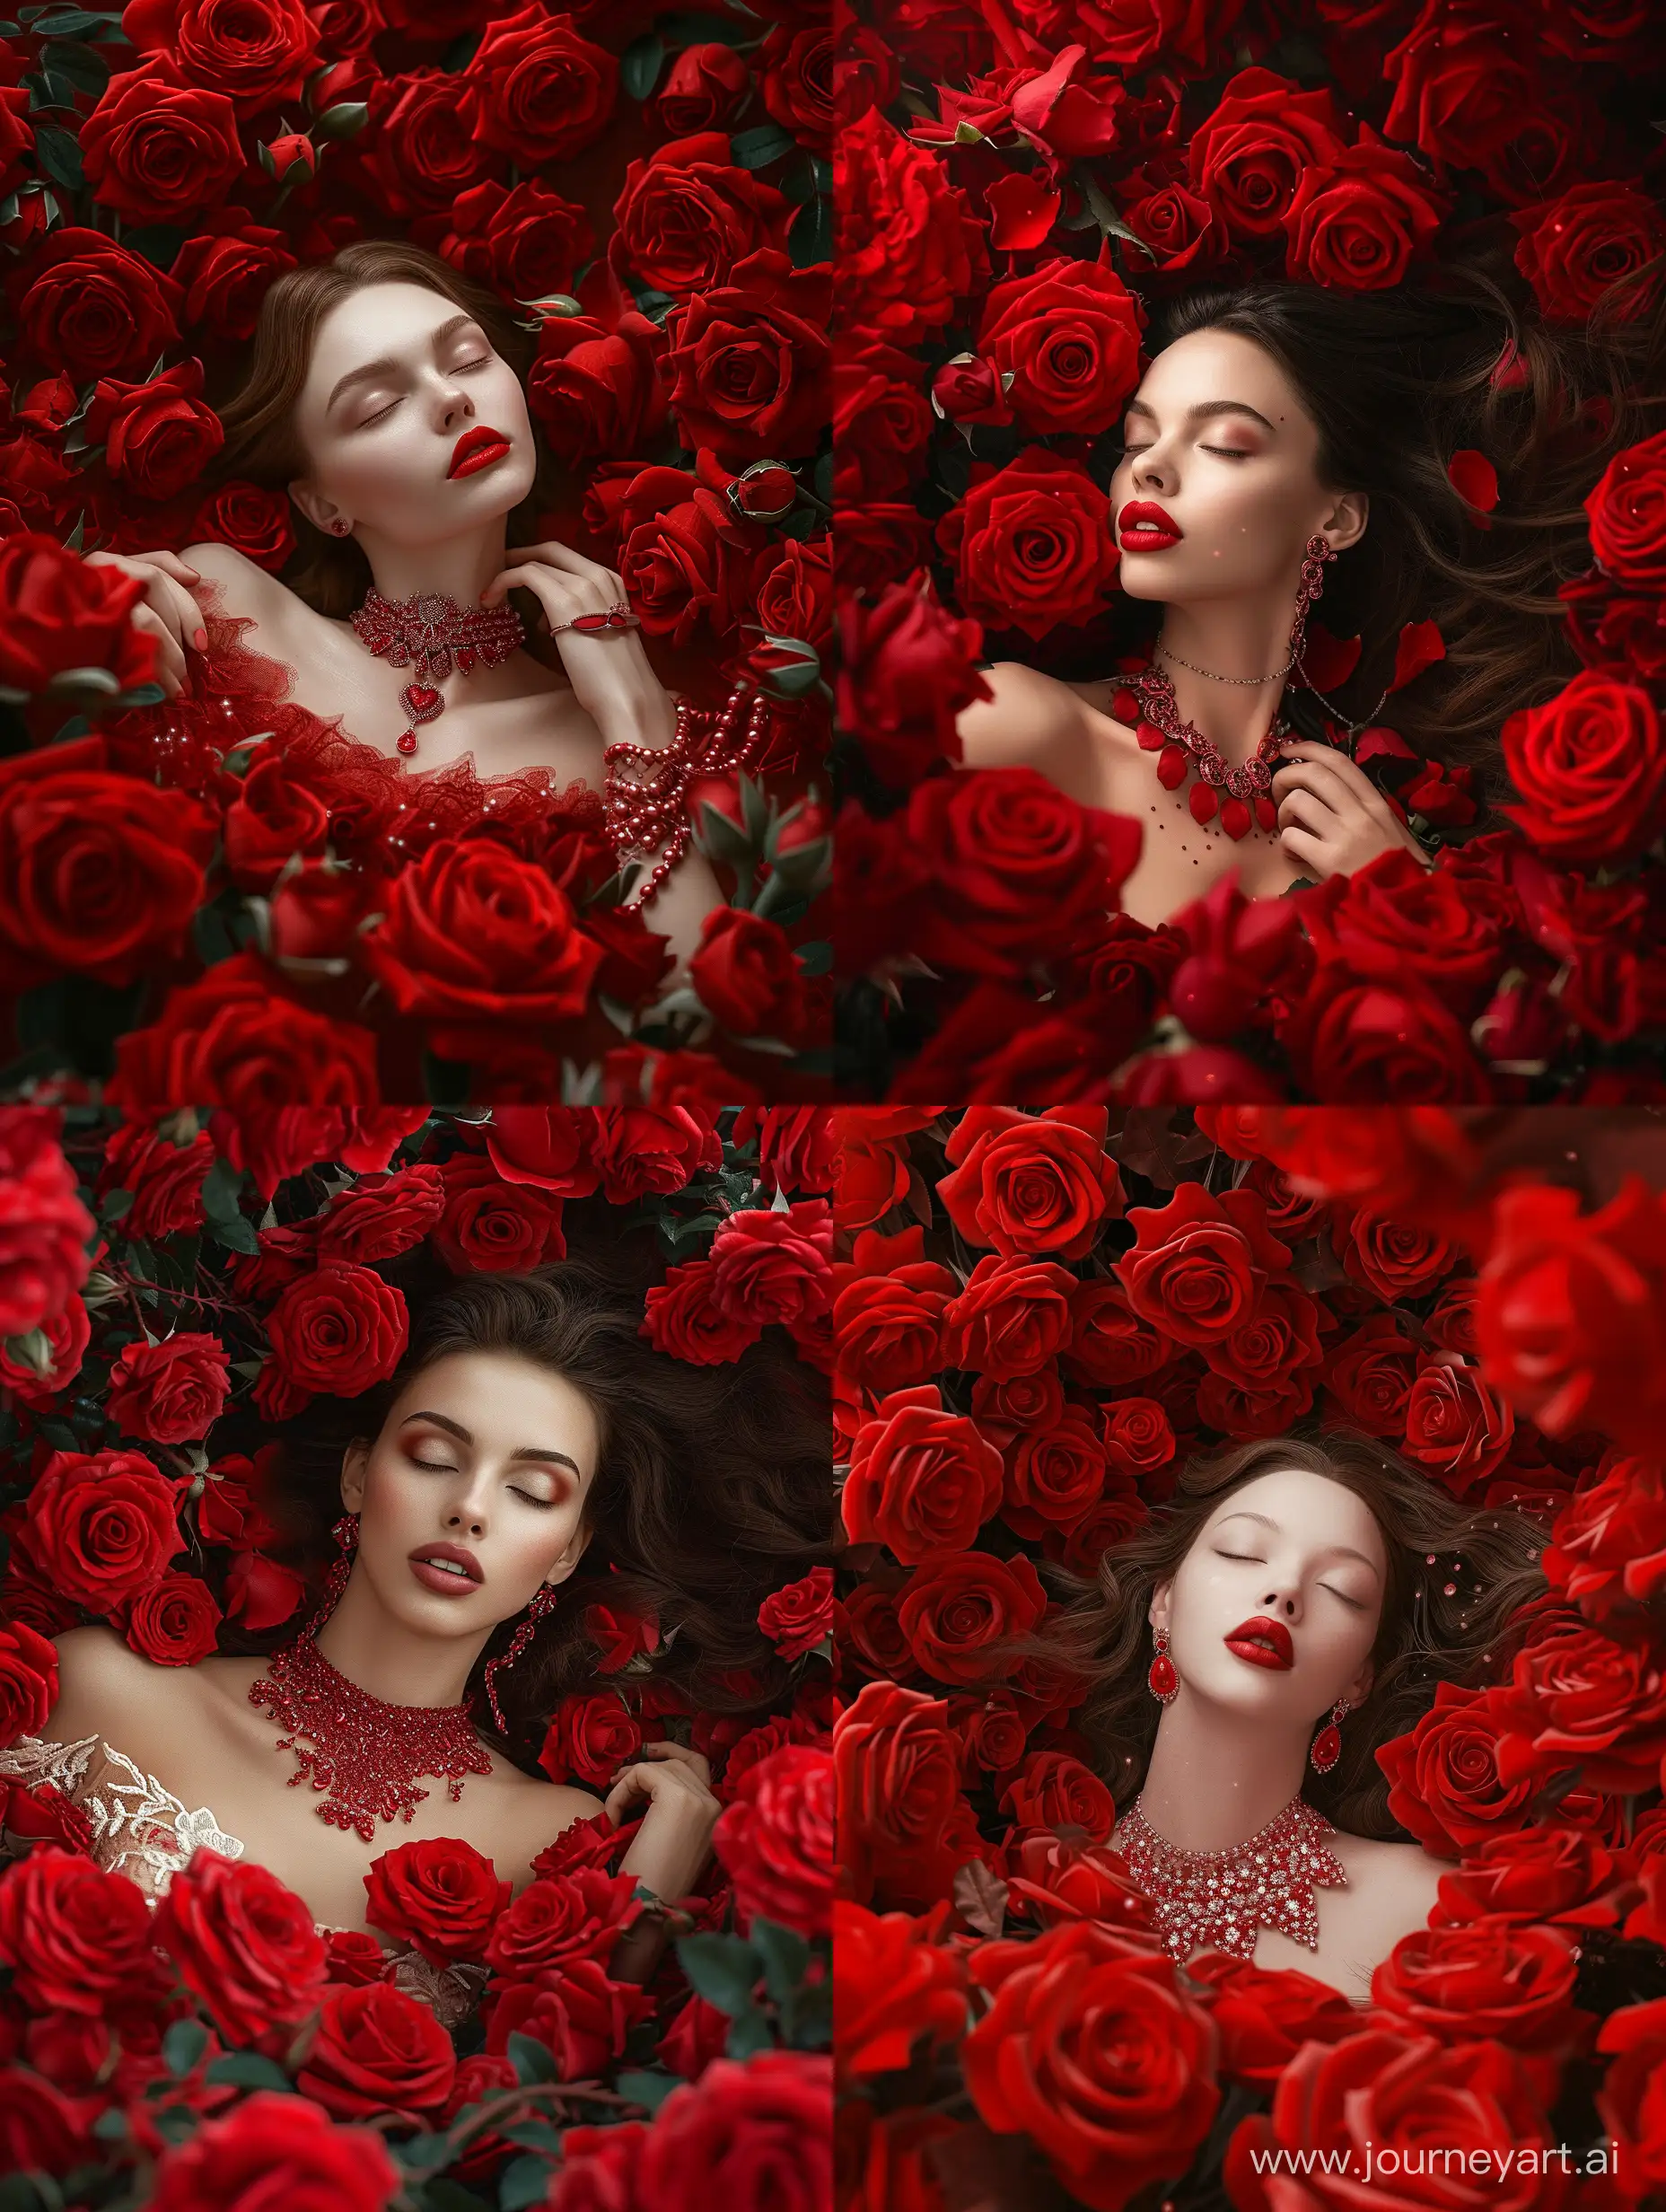 Dreamy-Woman-Amidst-Red-Roses-Imagines-Romantic-Kiss